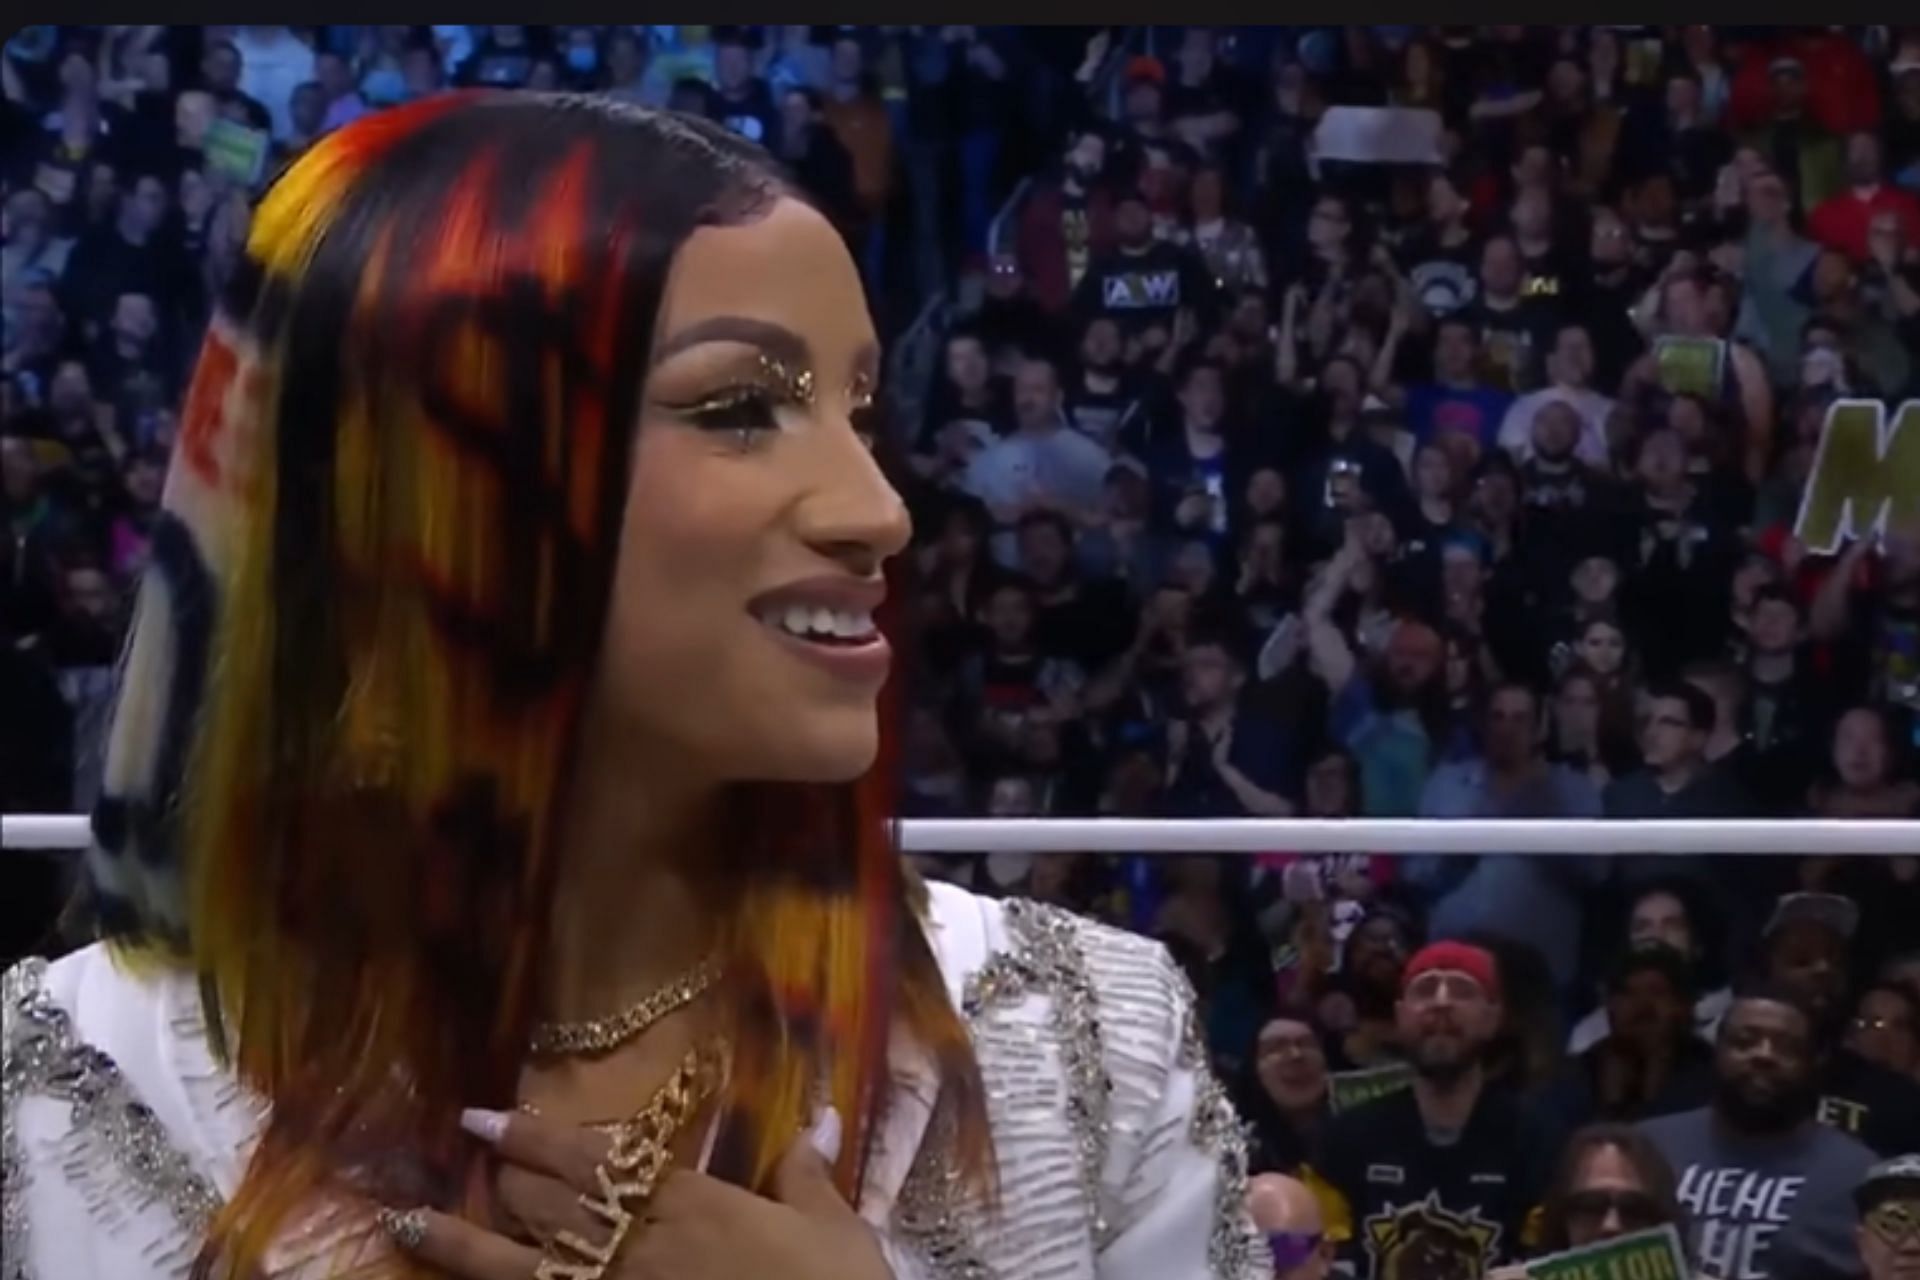 Mercedes Mone made her AEW debut on the special episode of Dynamite, Big Business